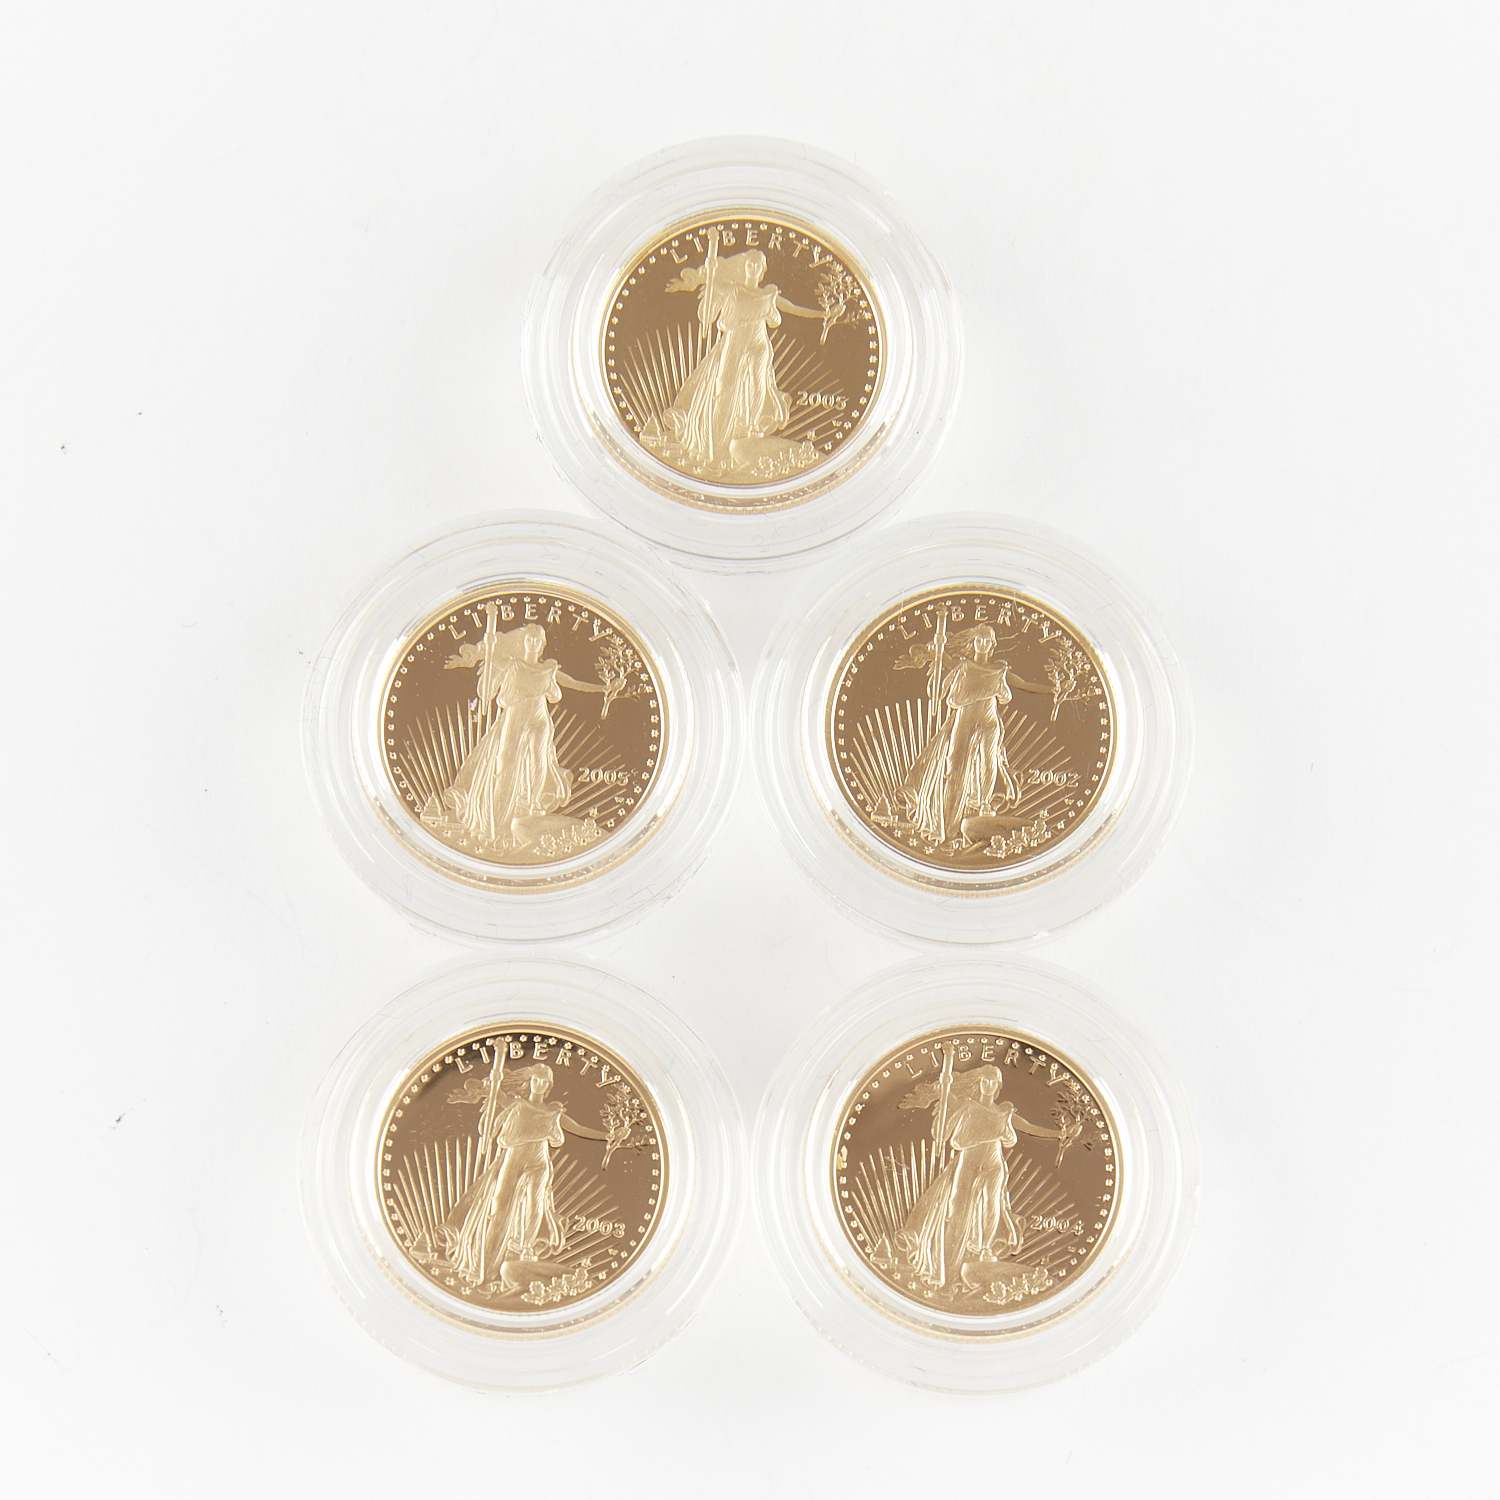 Group 5 $5 Gold American Eagle Proof Coins - Image 2 of 3